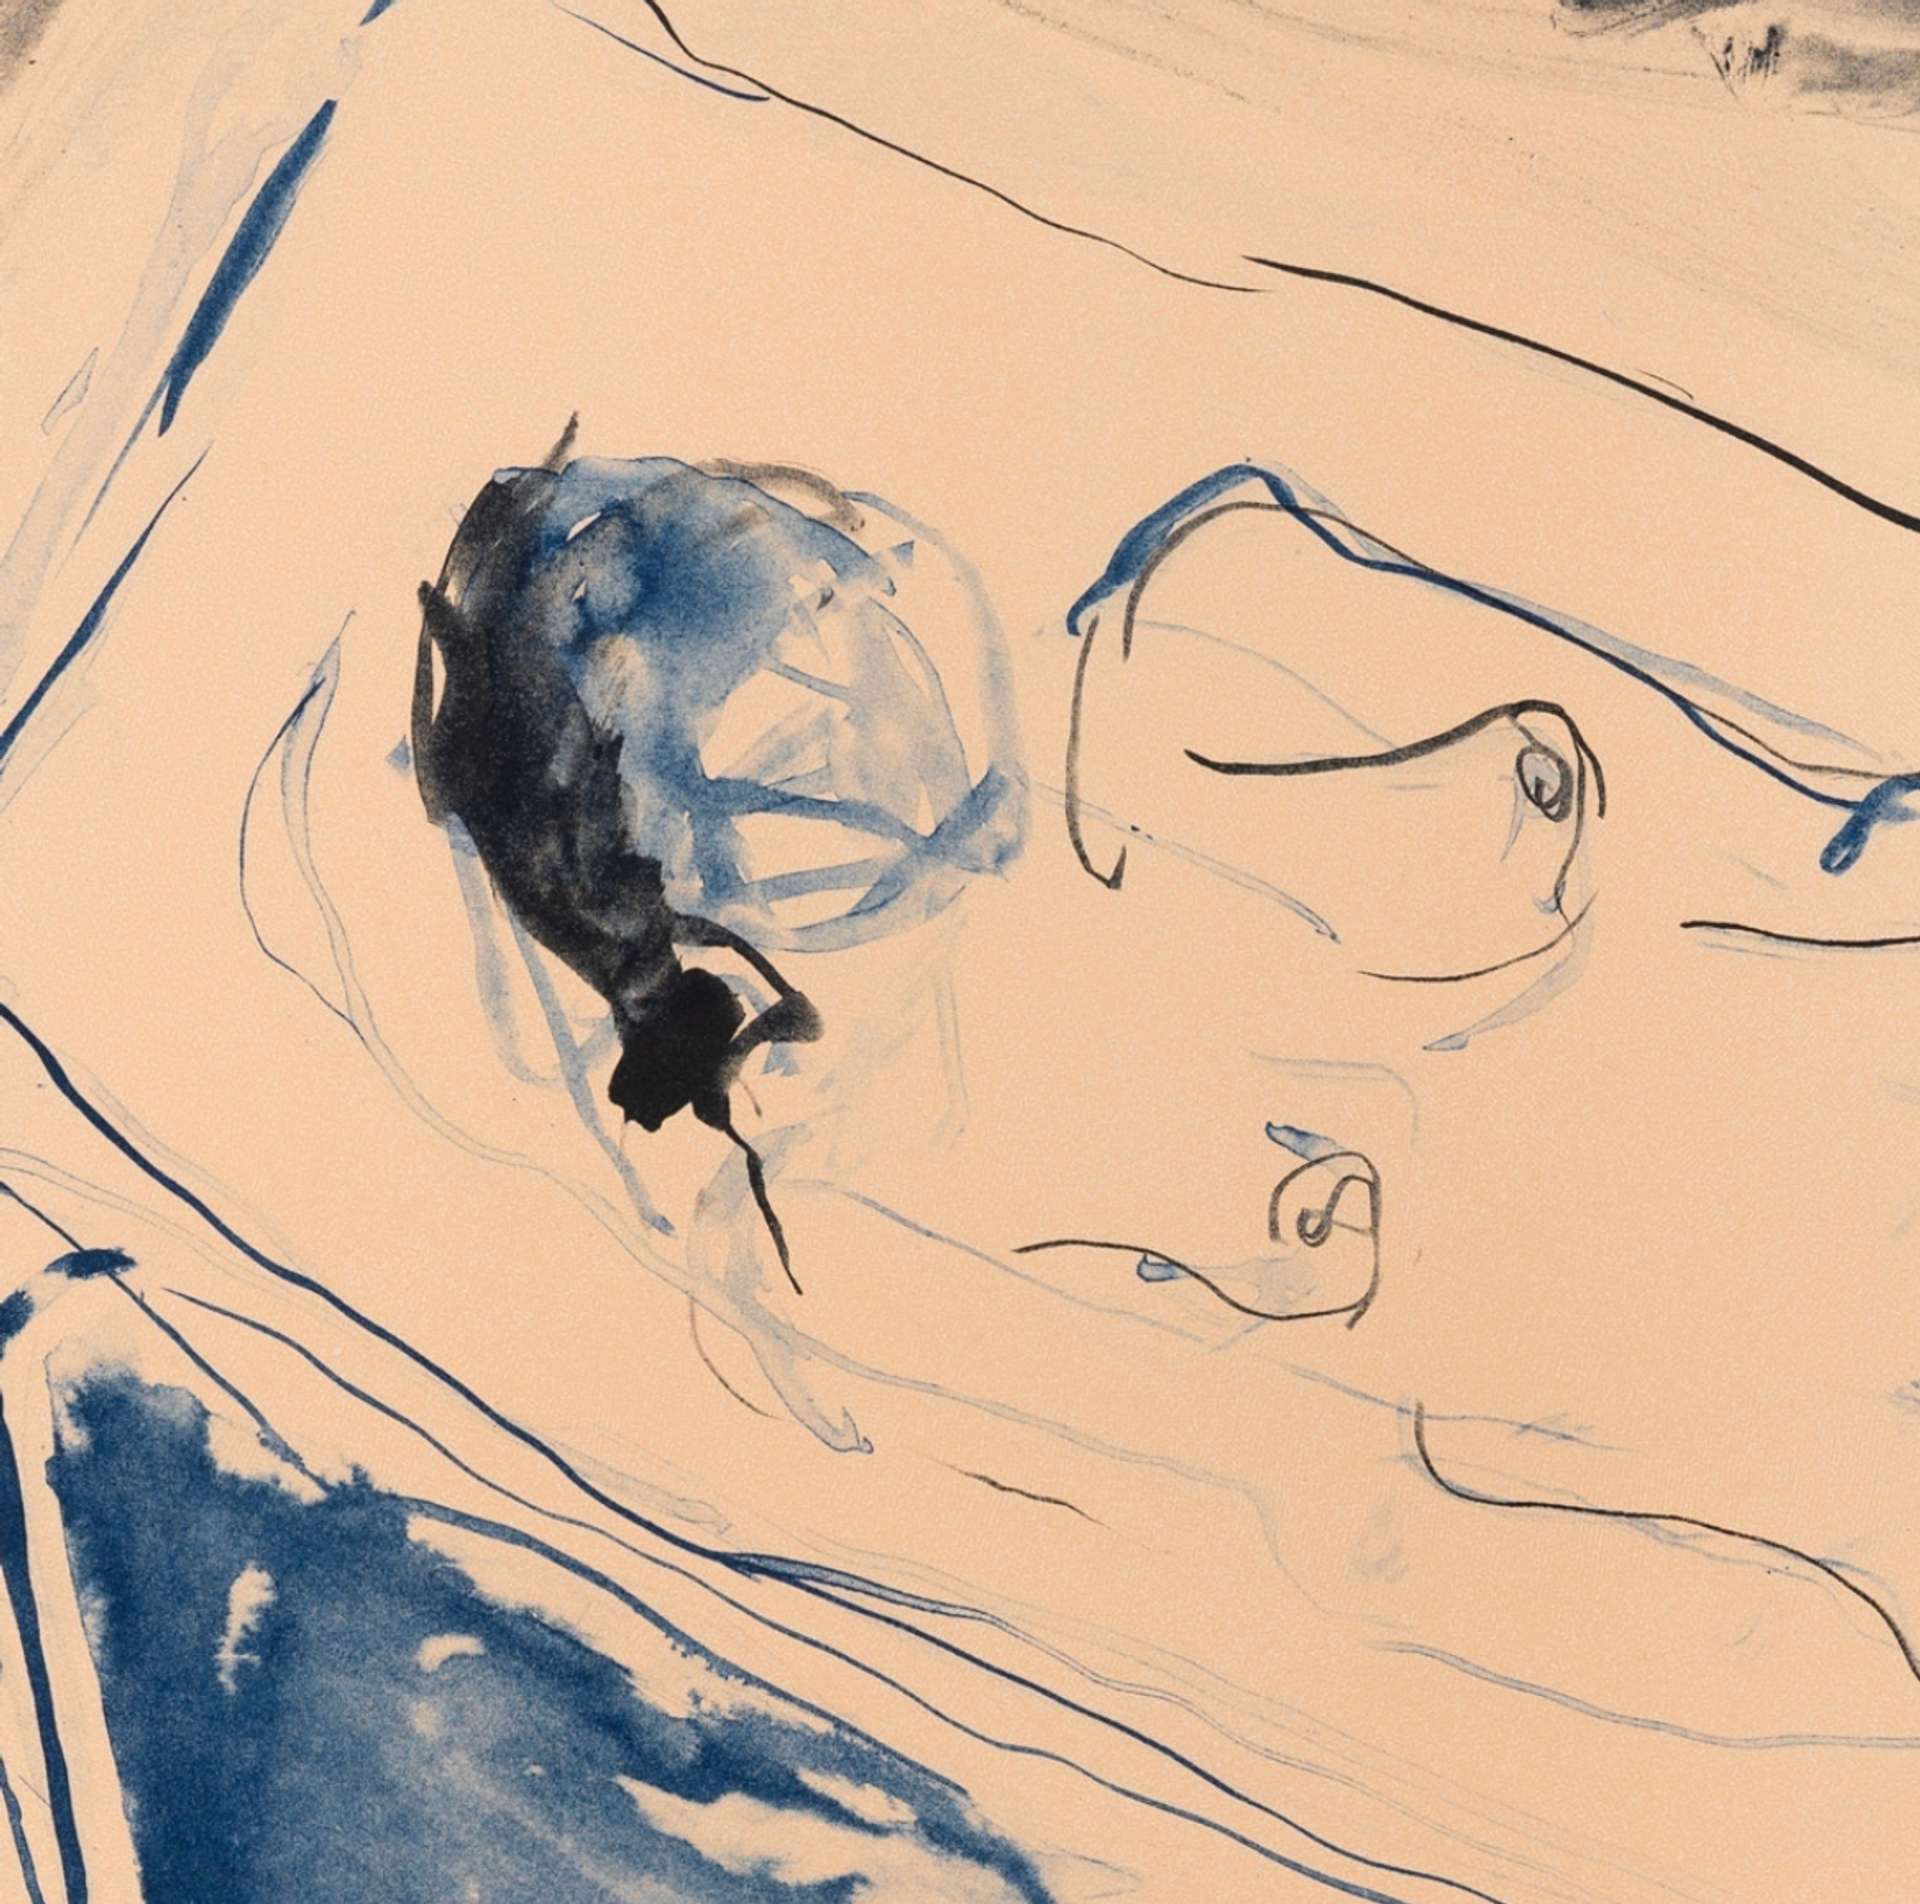 An image of the print Just Waiting by Tracey Emin. It shows a female nude lying in a coffin, her face obscured by a mass of blue paint. The colour palette is in blues and dark greys, against a cream background.